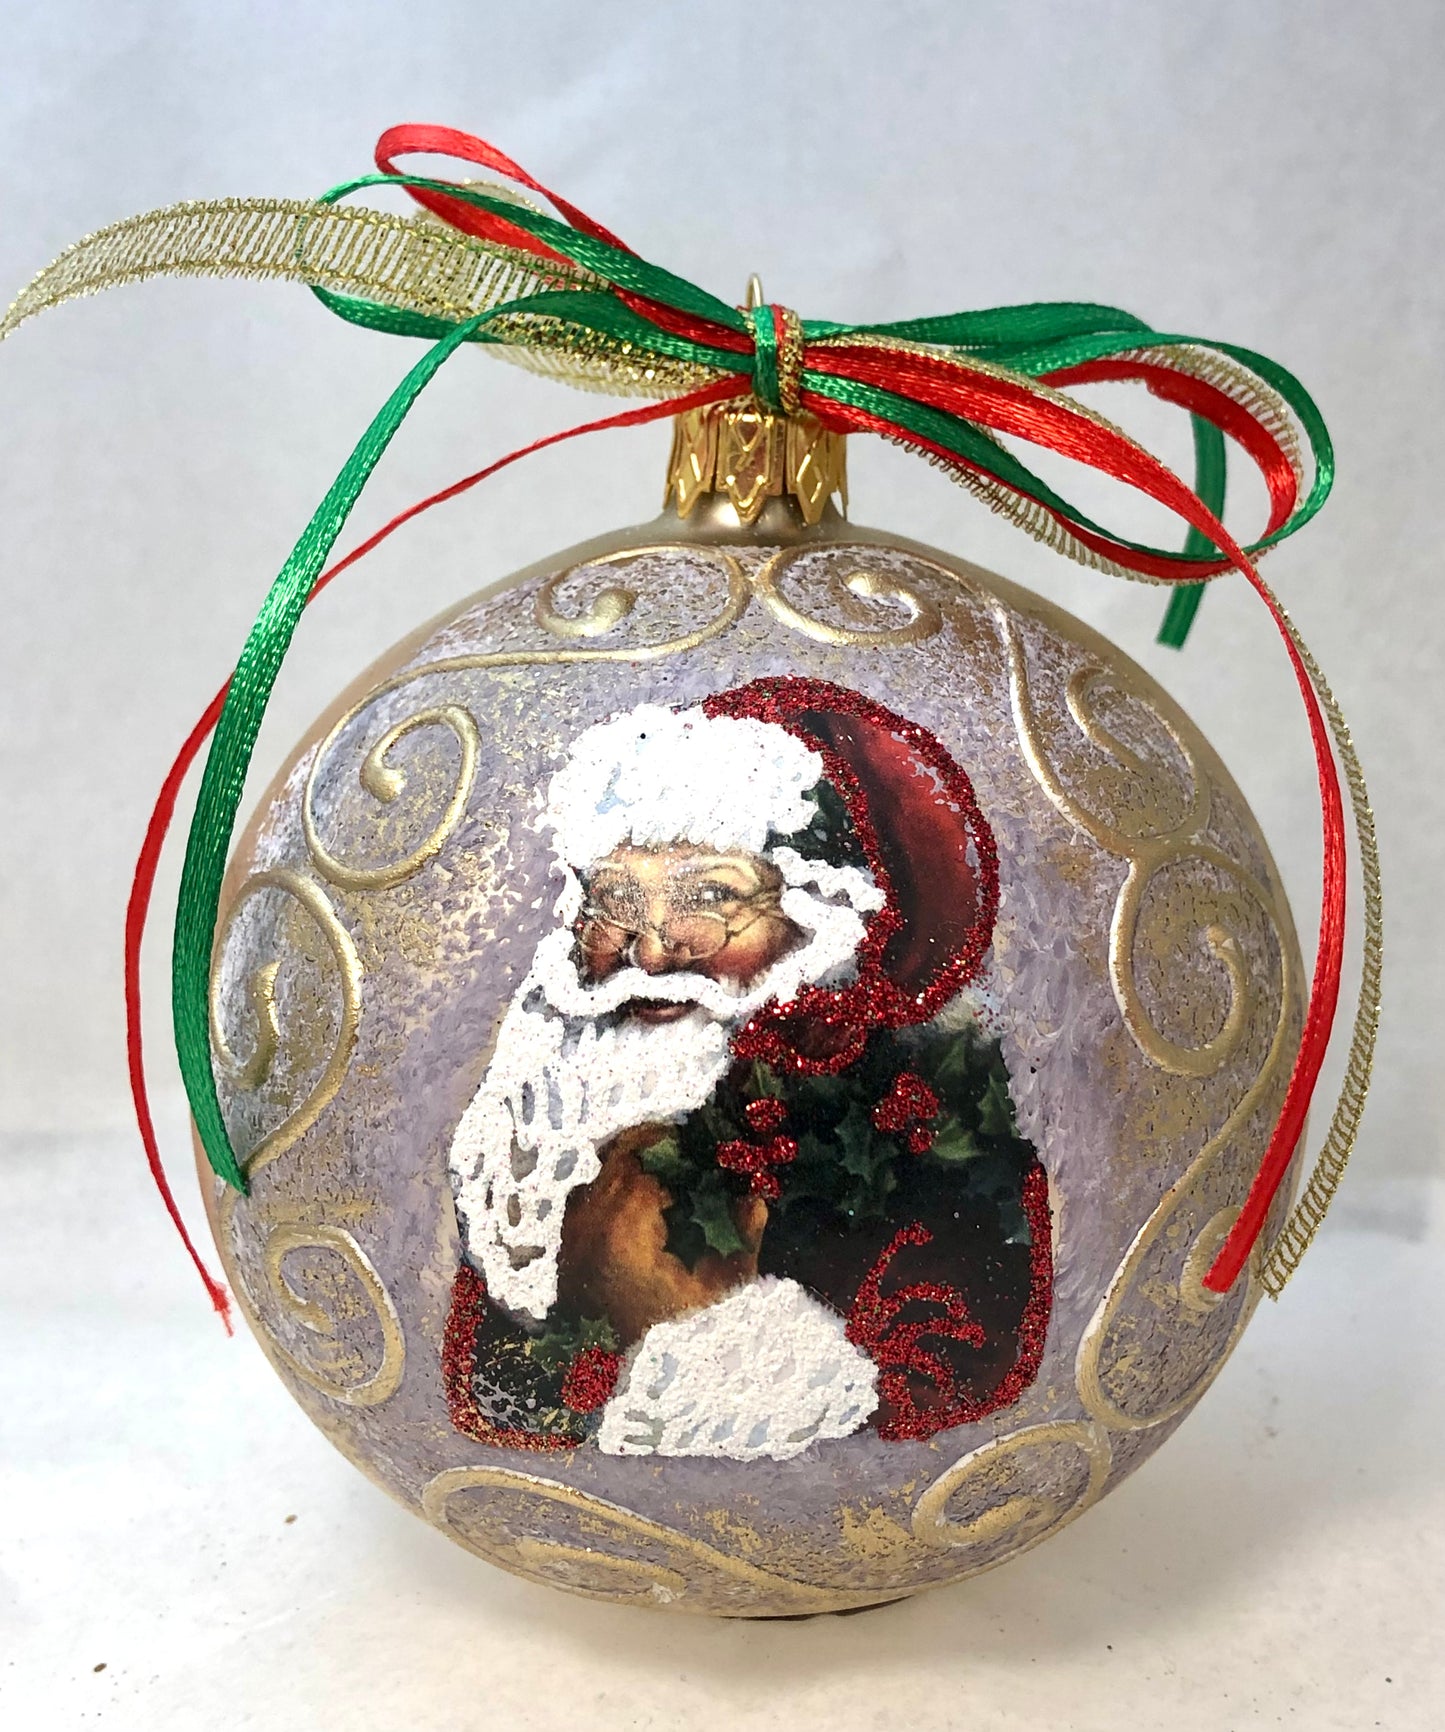 Bauble with Santa's face